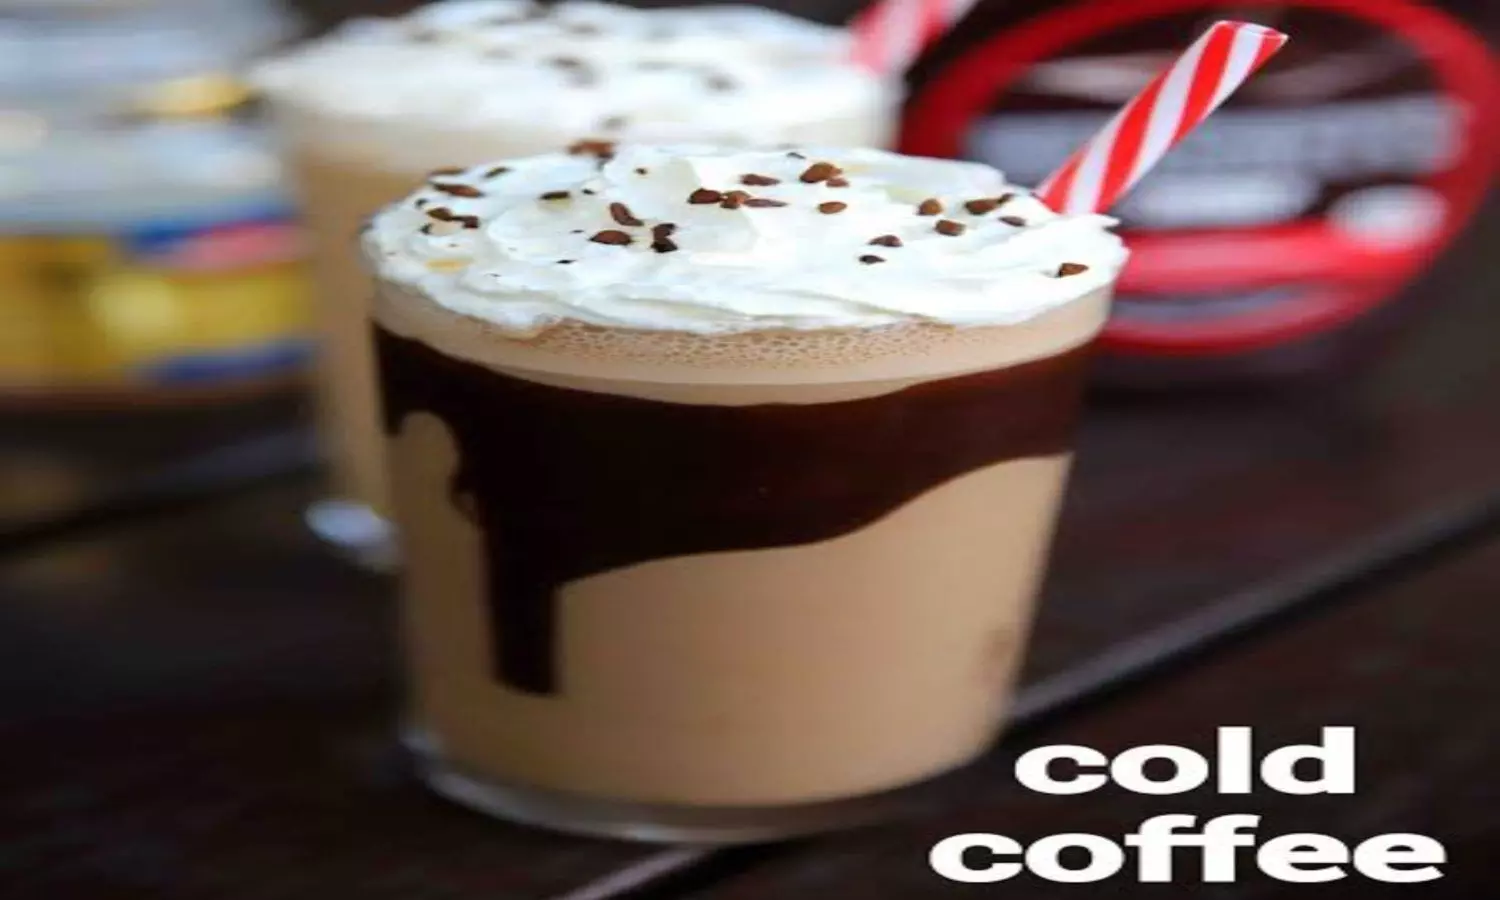 How to make cold coffee at home